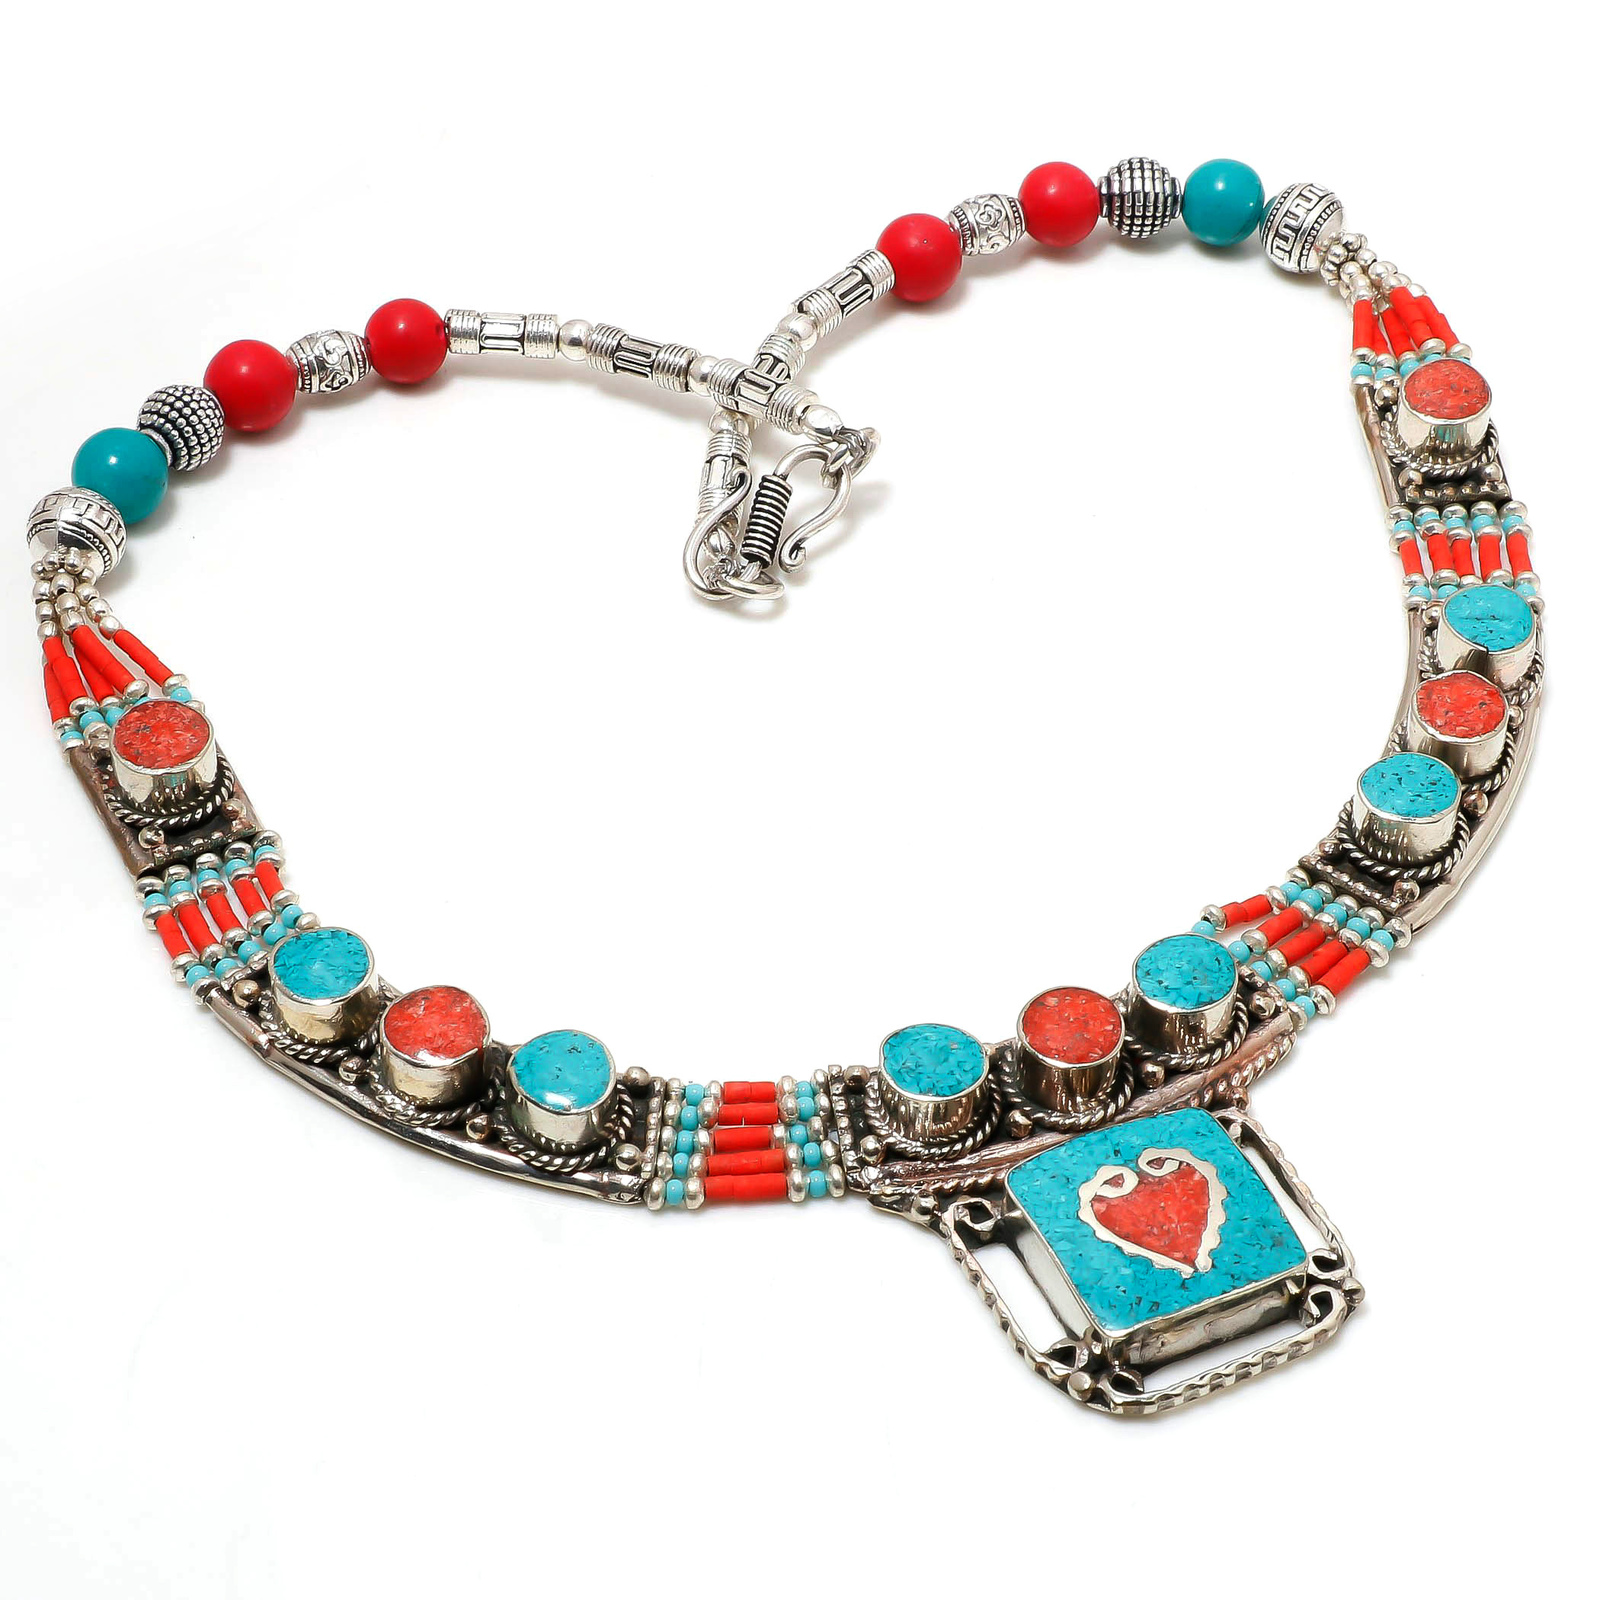 Primary image for Red Coral Tibetan Turquoise Handmade Ethnic Jewelry Necklace Nepali 18" SA 4552